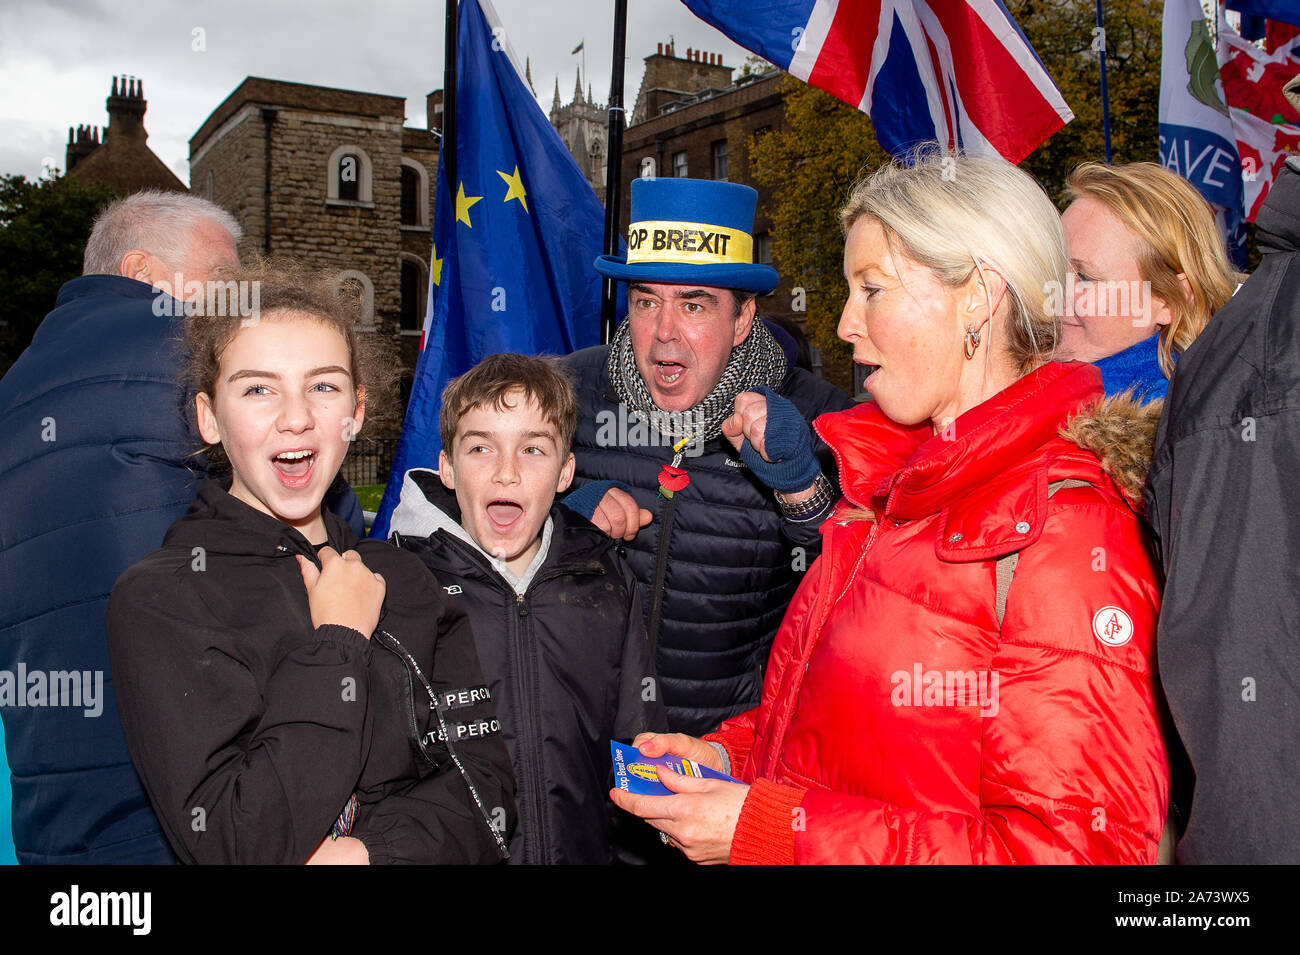 Westminster, London, UK. 29th October, 2019. SODEM Stop Brexit man Steve Bray poses for a photo with a family as they shout Stop Brexit at College Green, Westminister. Credit: Maureen McLean/Alamy Stock Photo